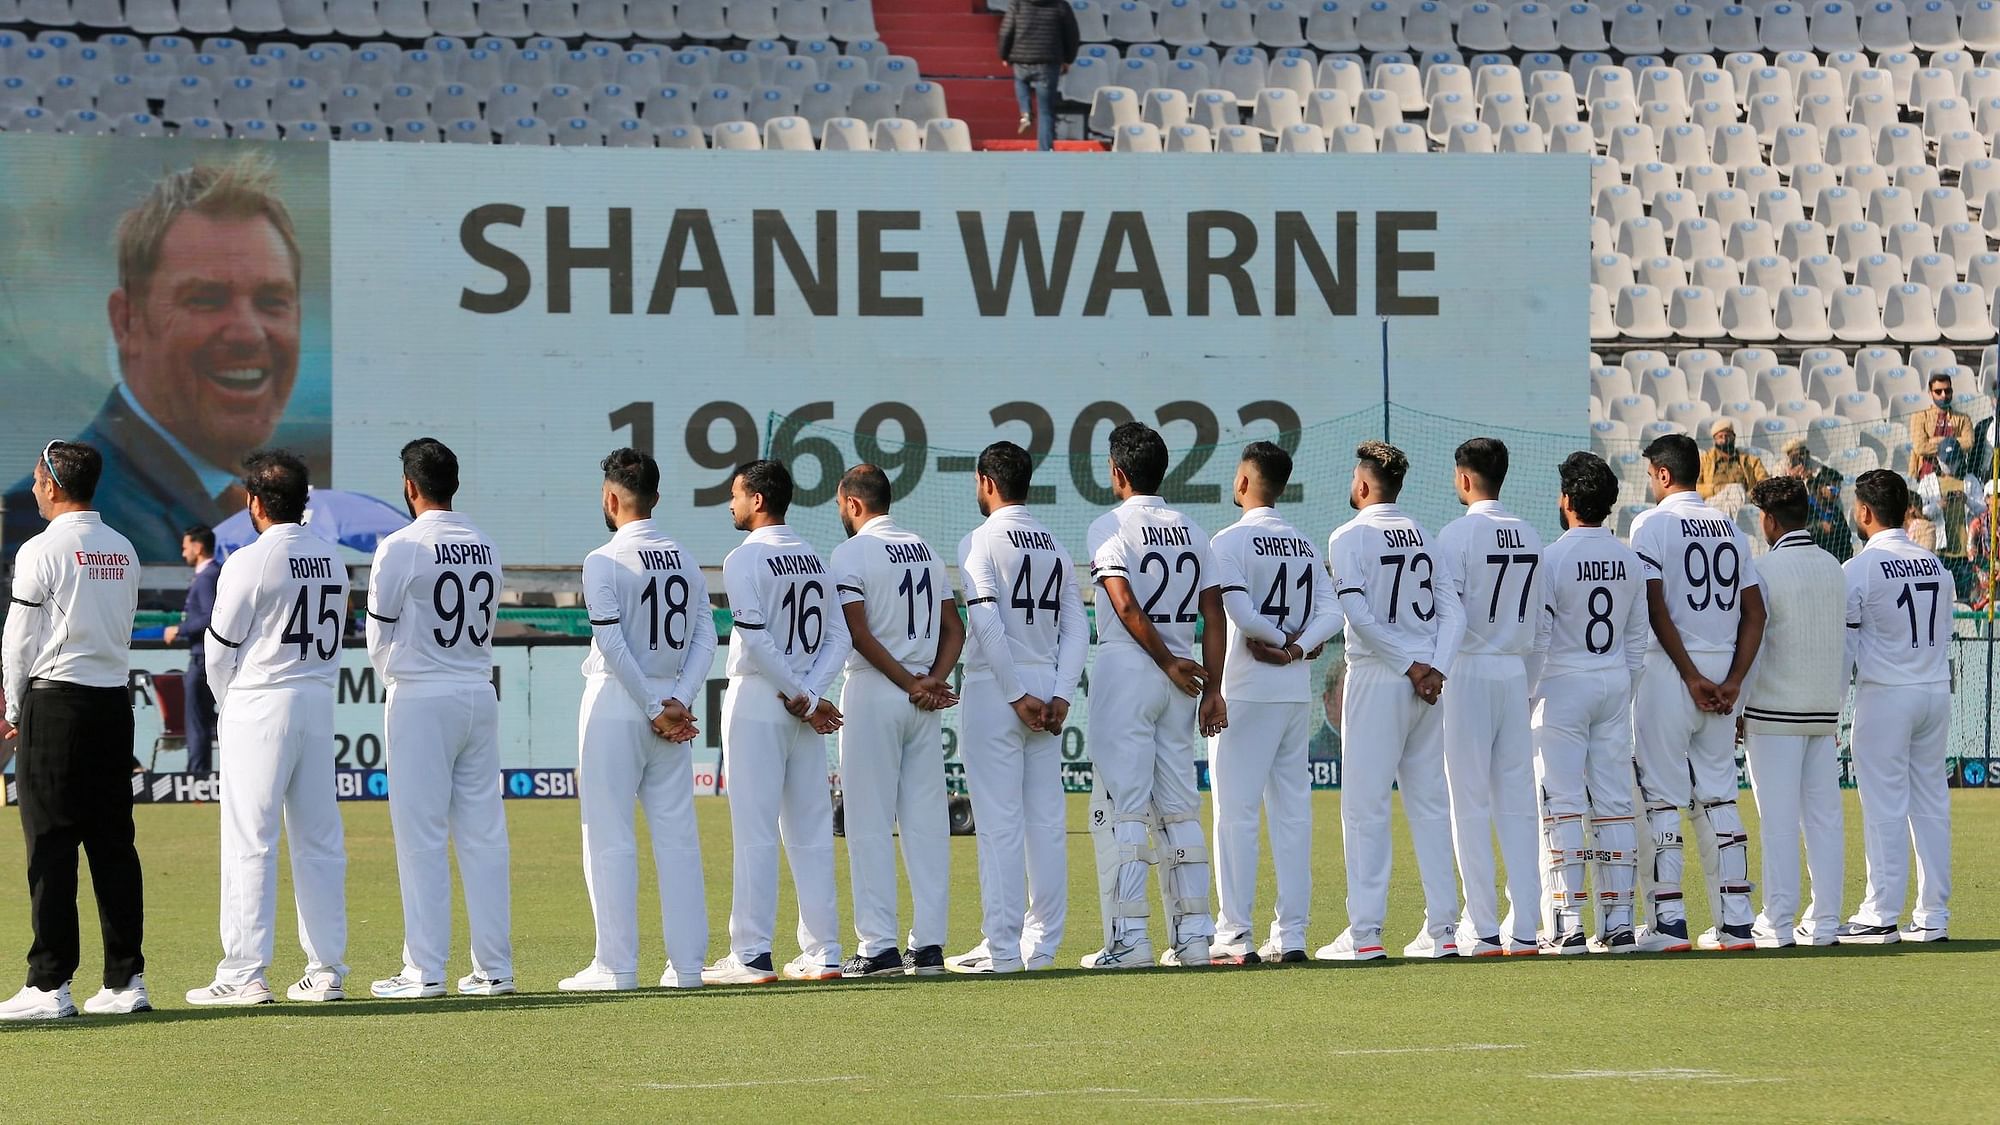 <div class="paragraphs"><p>Players from India and Sri Lanka pay respect to Shane Warne before the start of Day 2 of the first Test.</p></div>